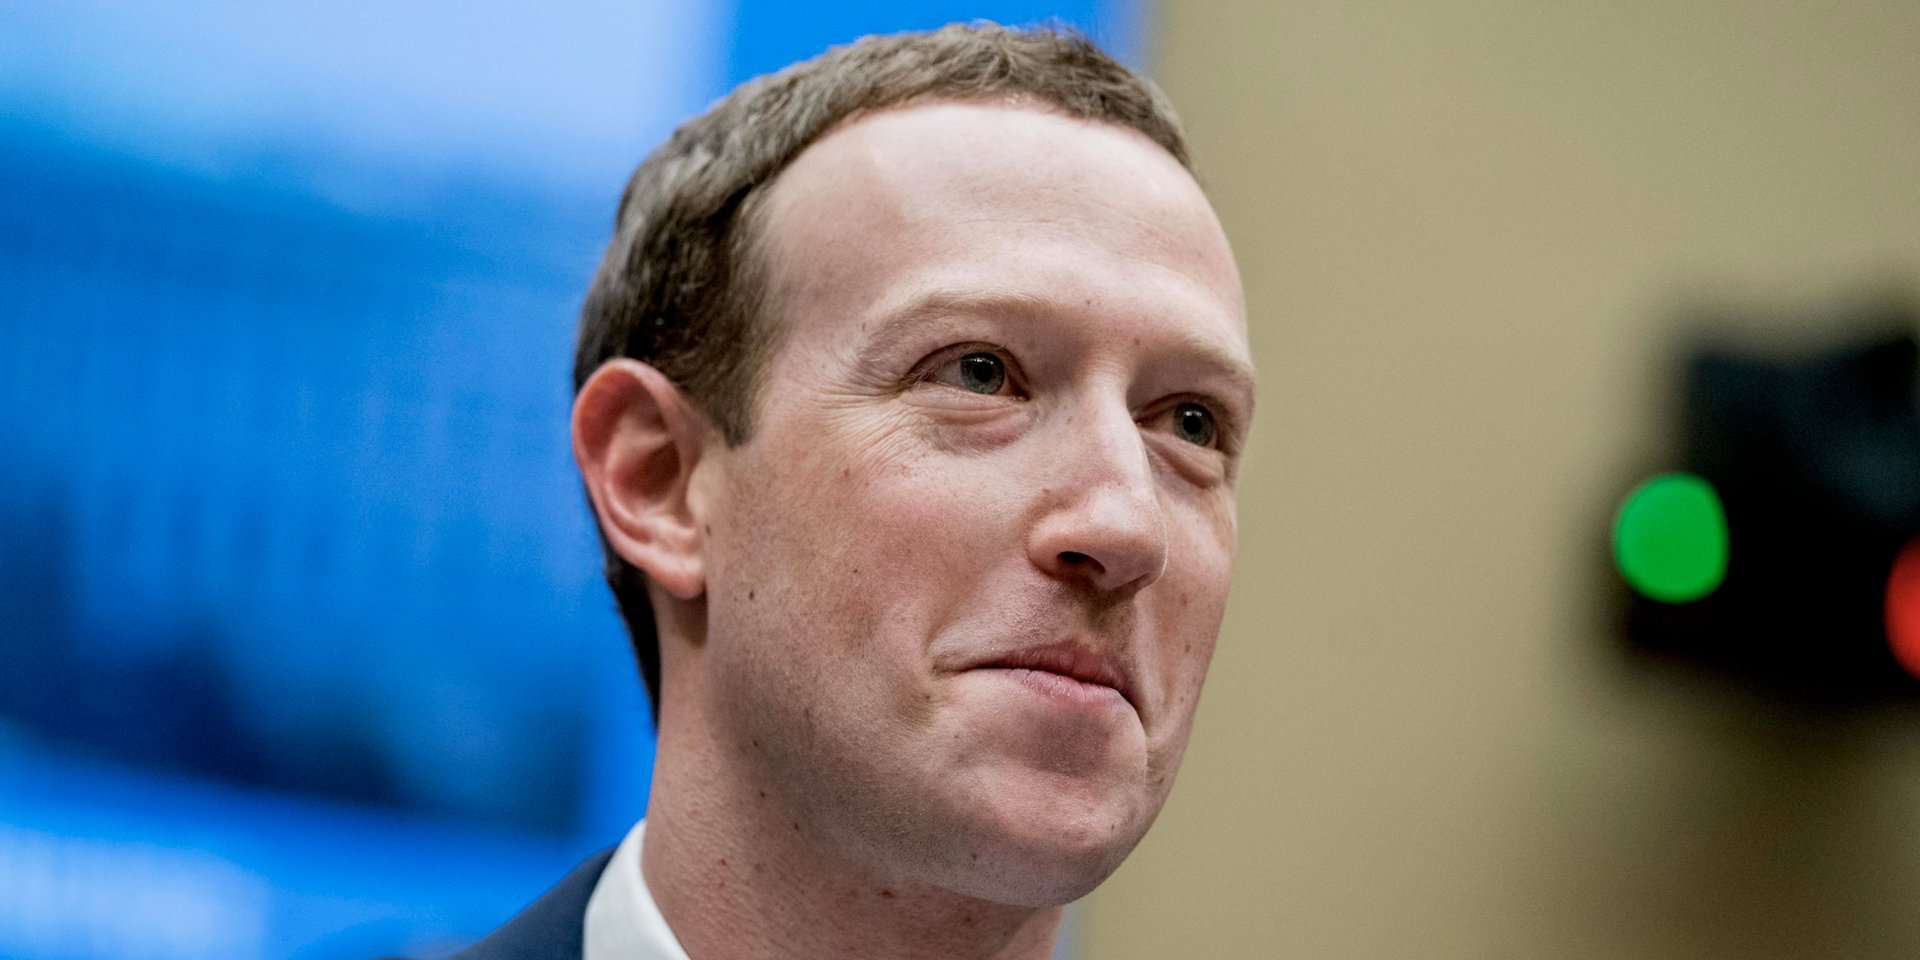 image for The FTC's $5 billion fine for Facebook is so meaningless, it will likely leave Mark Zuckerberg wondering what he can't get away with